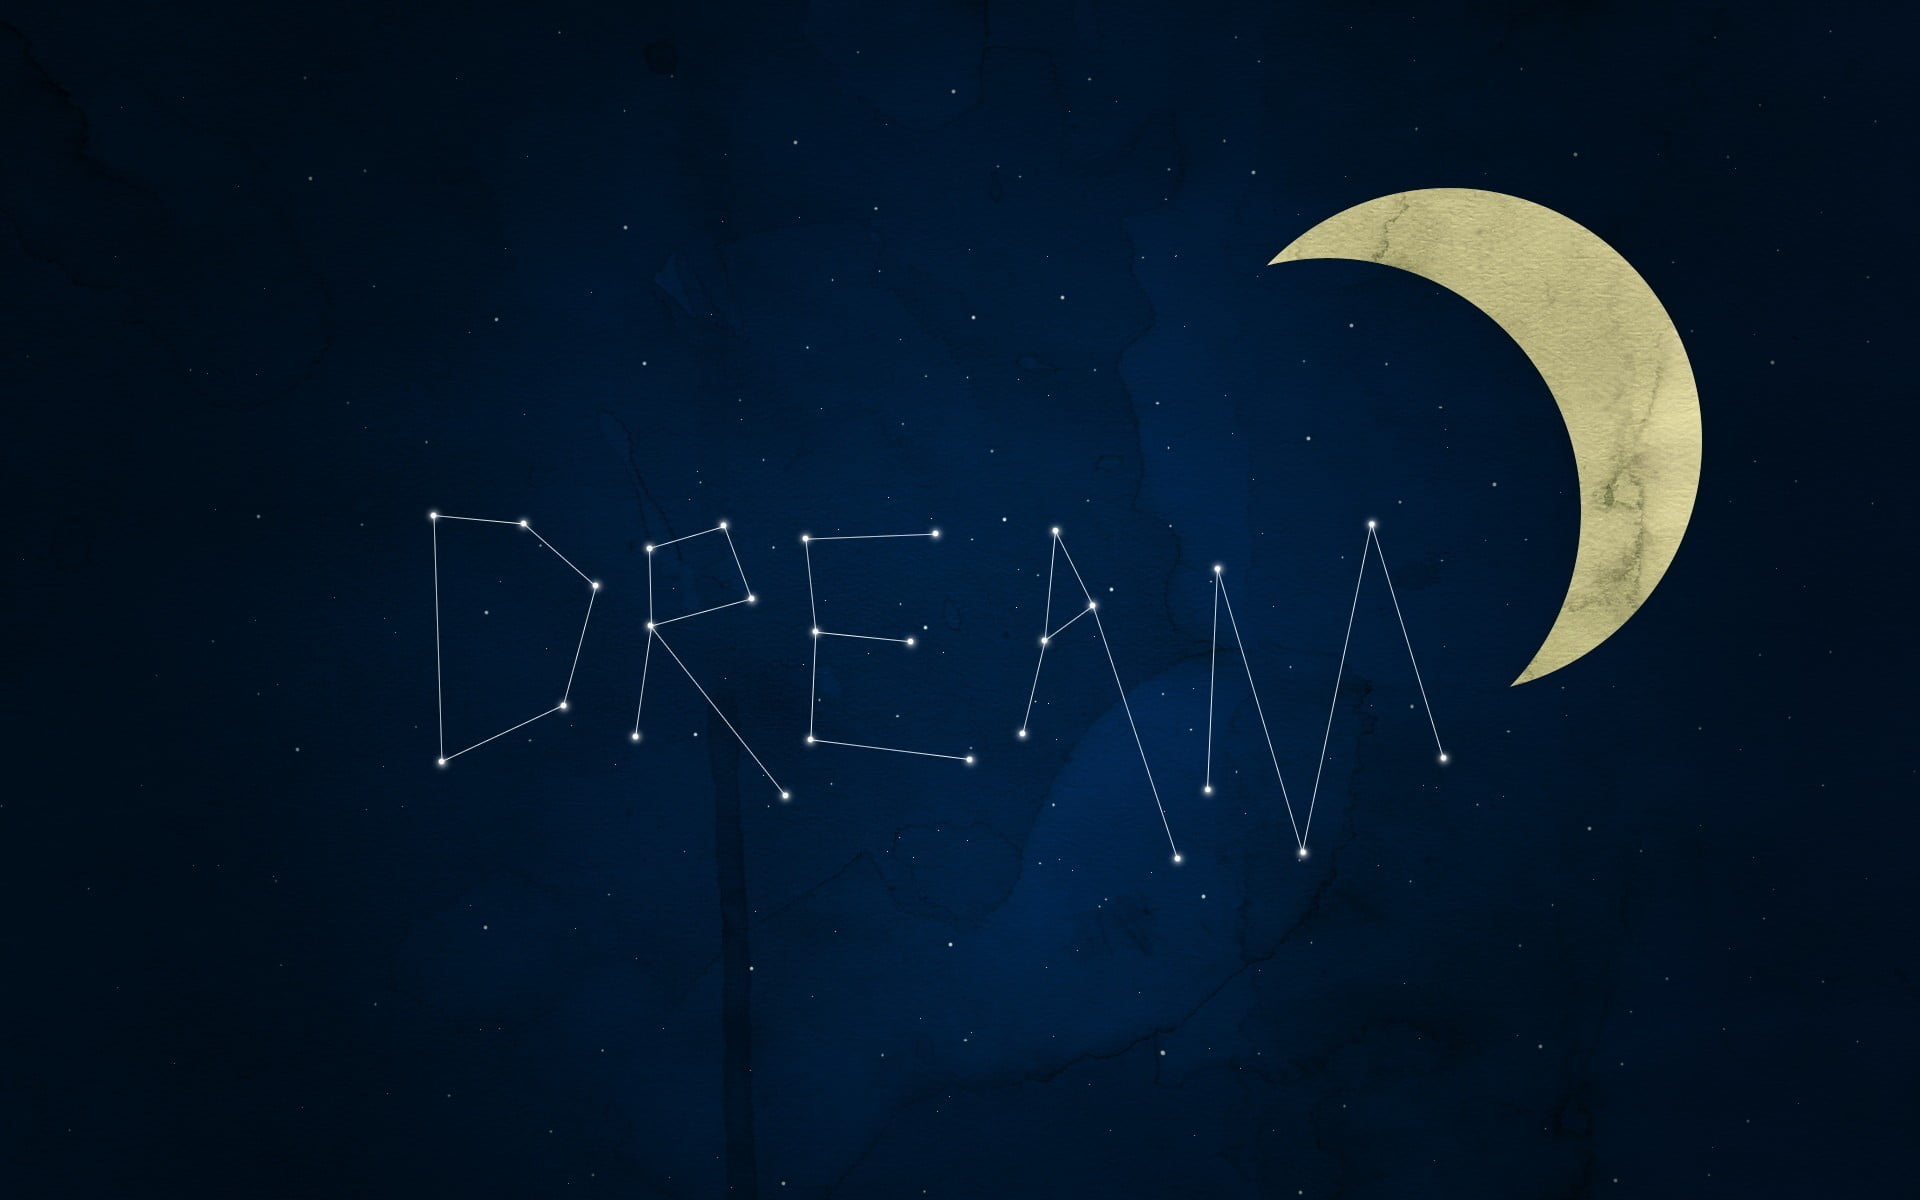 Dream wallpaper with the word dream written in stars - Constellation